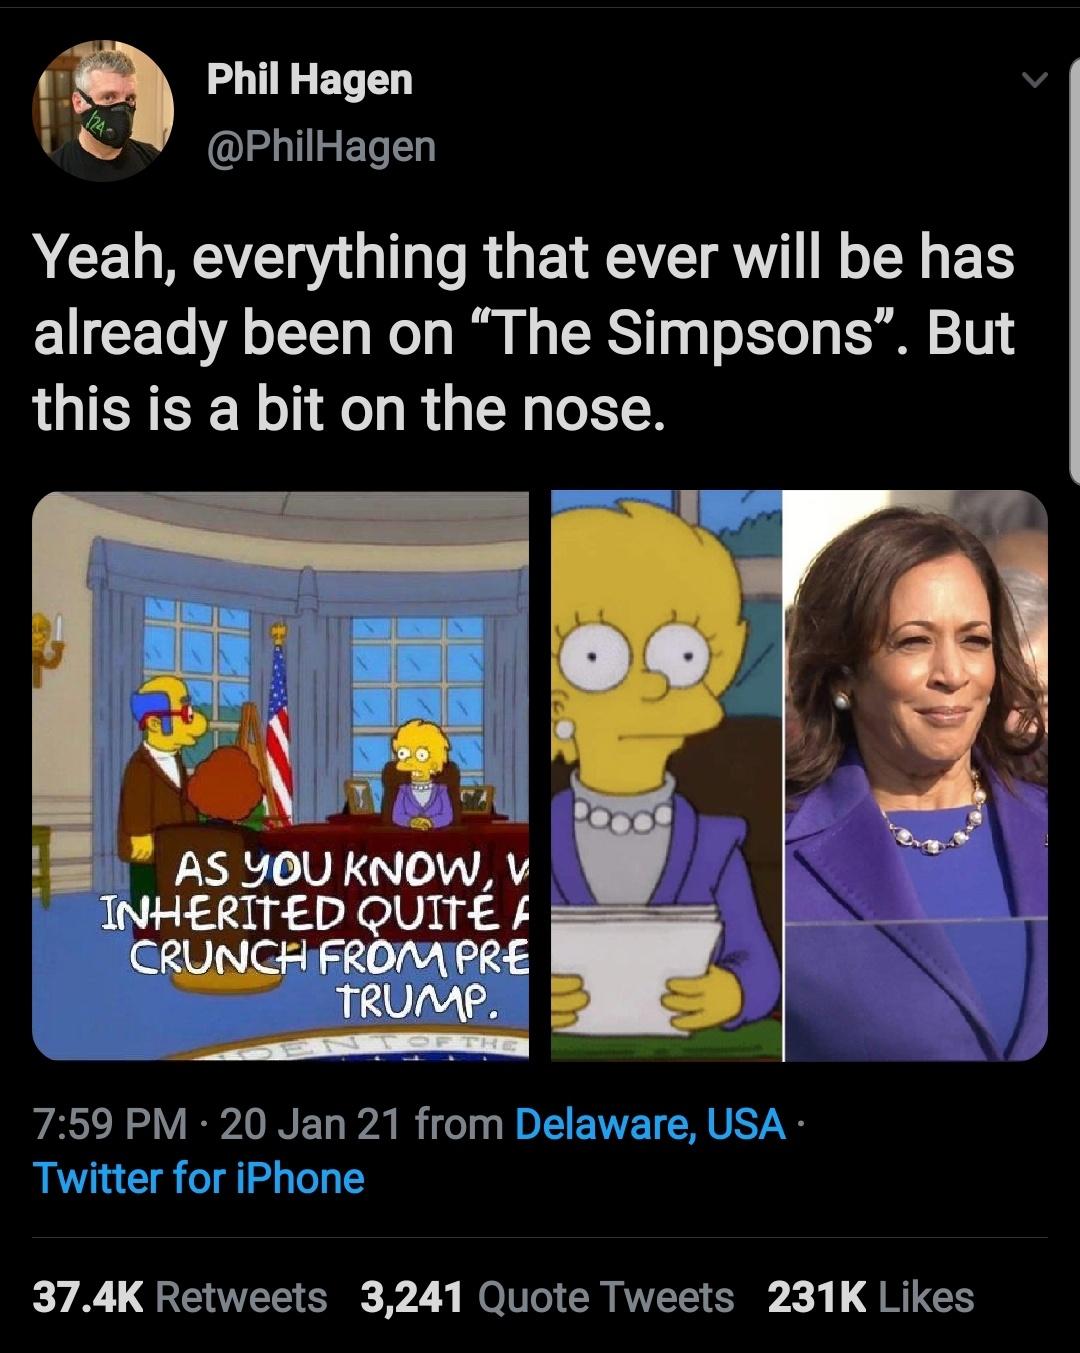 presentation - Phil Hagen Yeah, everything that ever will be has already been on The Simpsons. But this is a bit on the nose. As You Know, V Inherited Quite A Crunch From Pre Trump. 20 Jan 21 from Delaware, Usa Twitter for iPhone 3,241 Quote Tweets